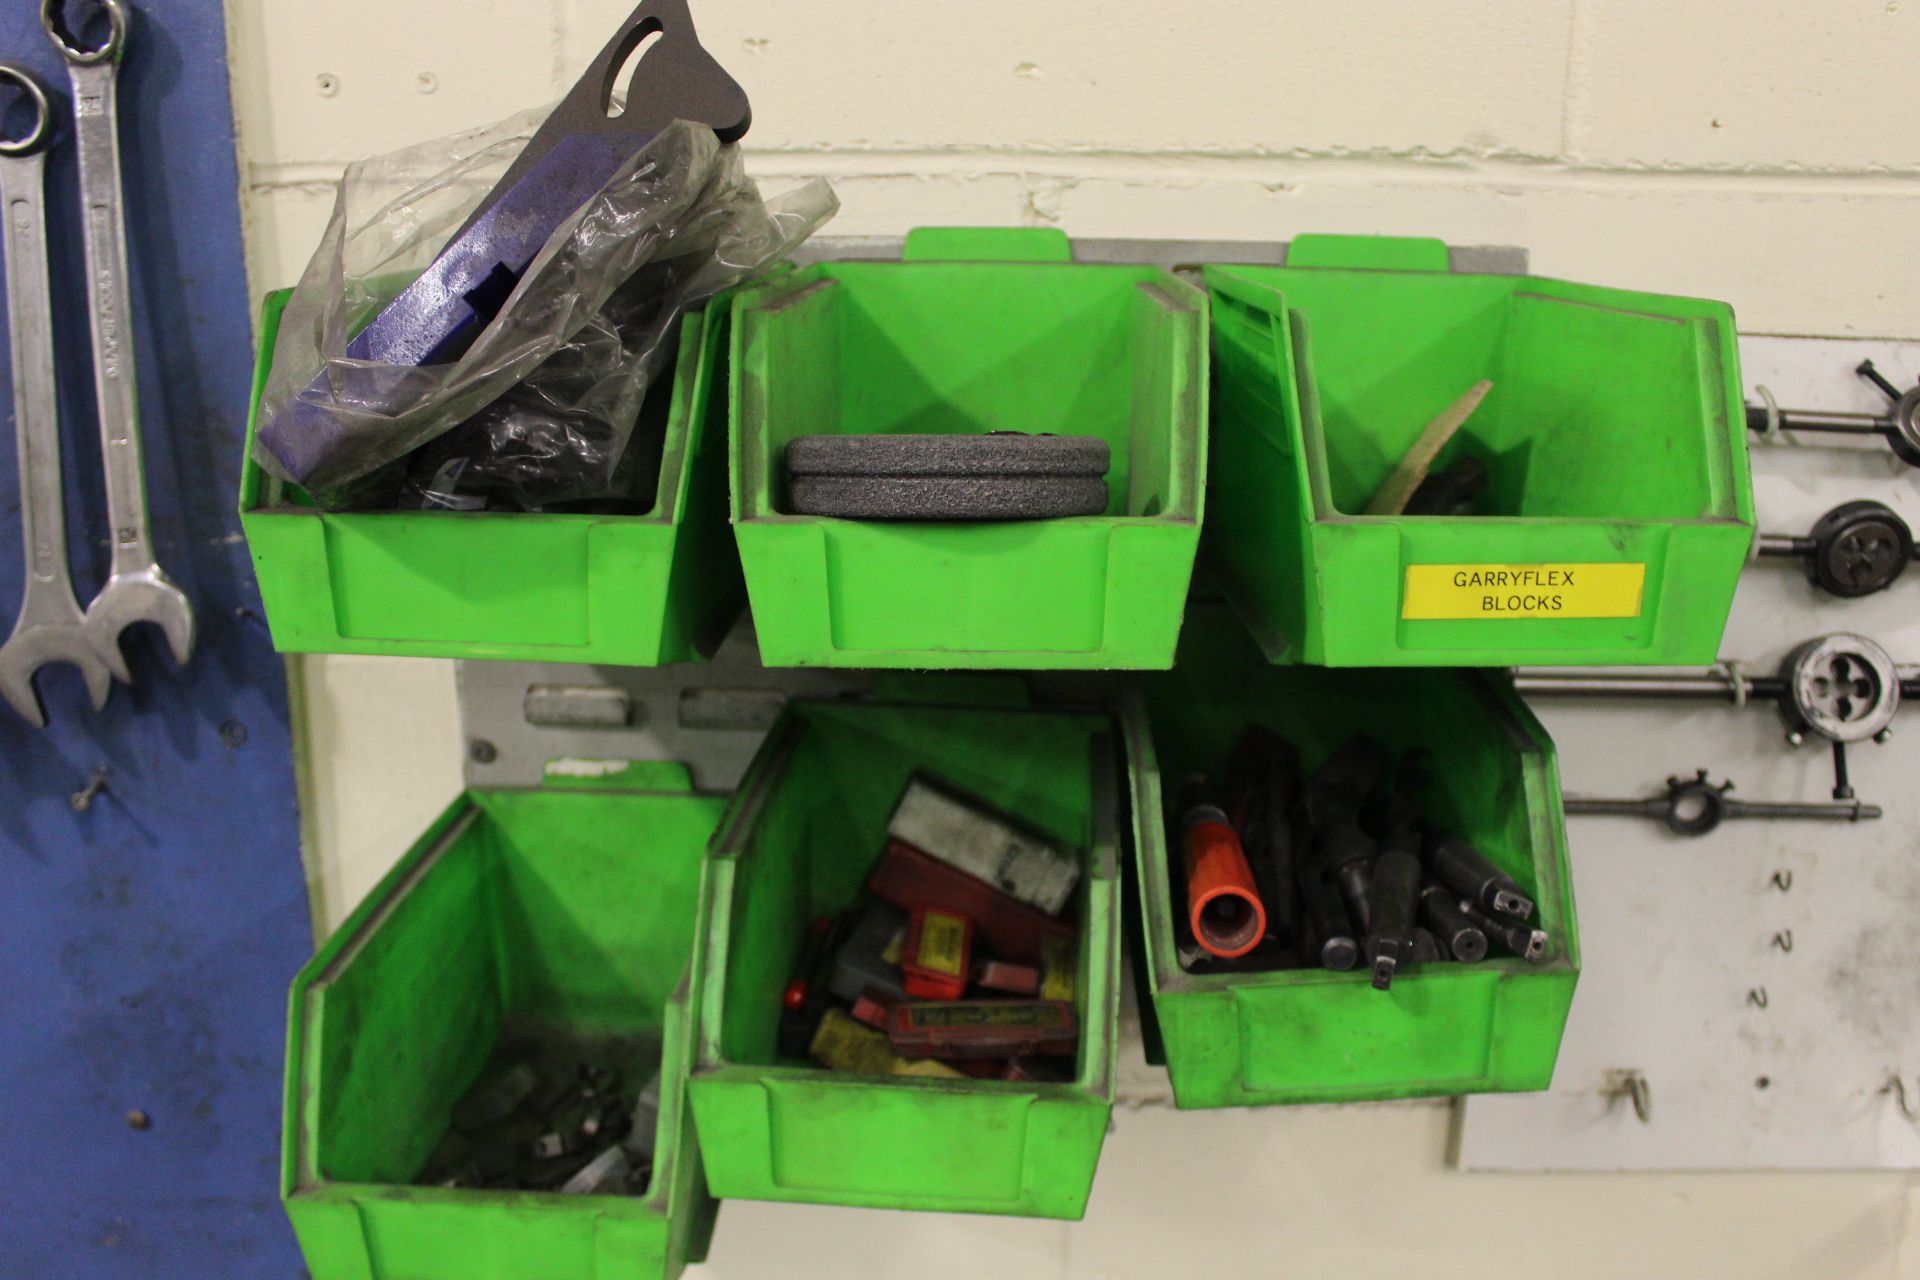 Tool board of various Draper and Chrome-Vandium Wrenches with lin bins of assorted drill bits, - Image 2 of 4